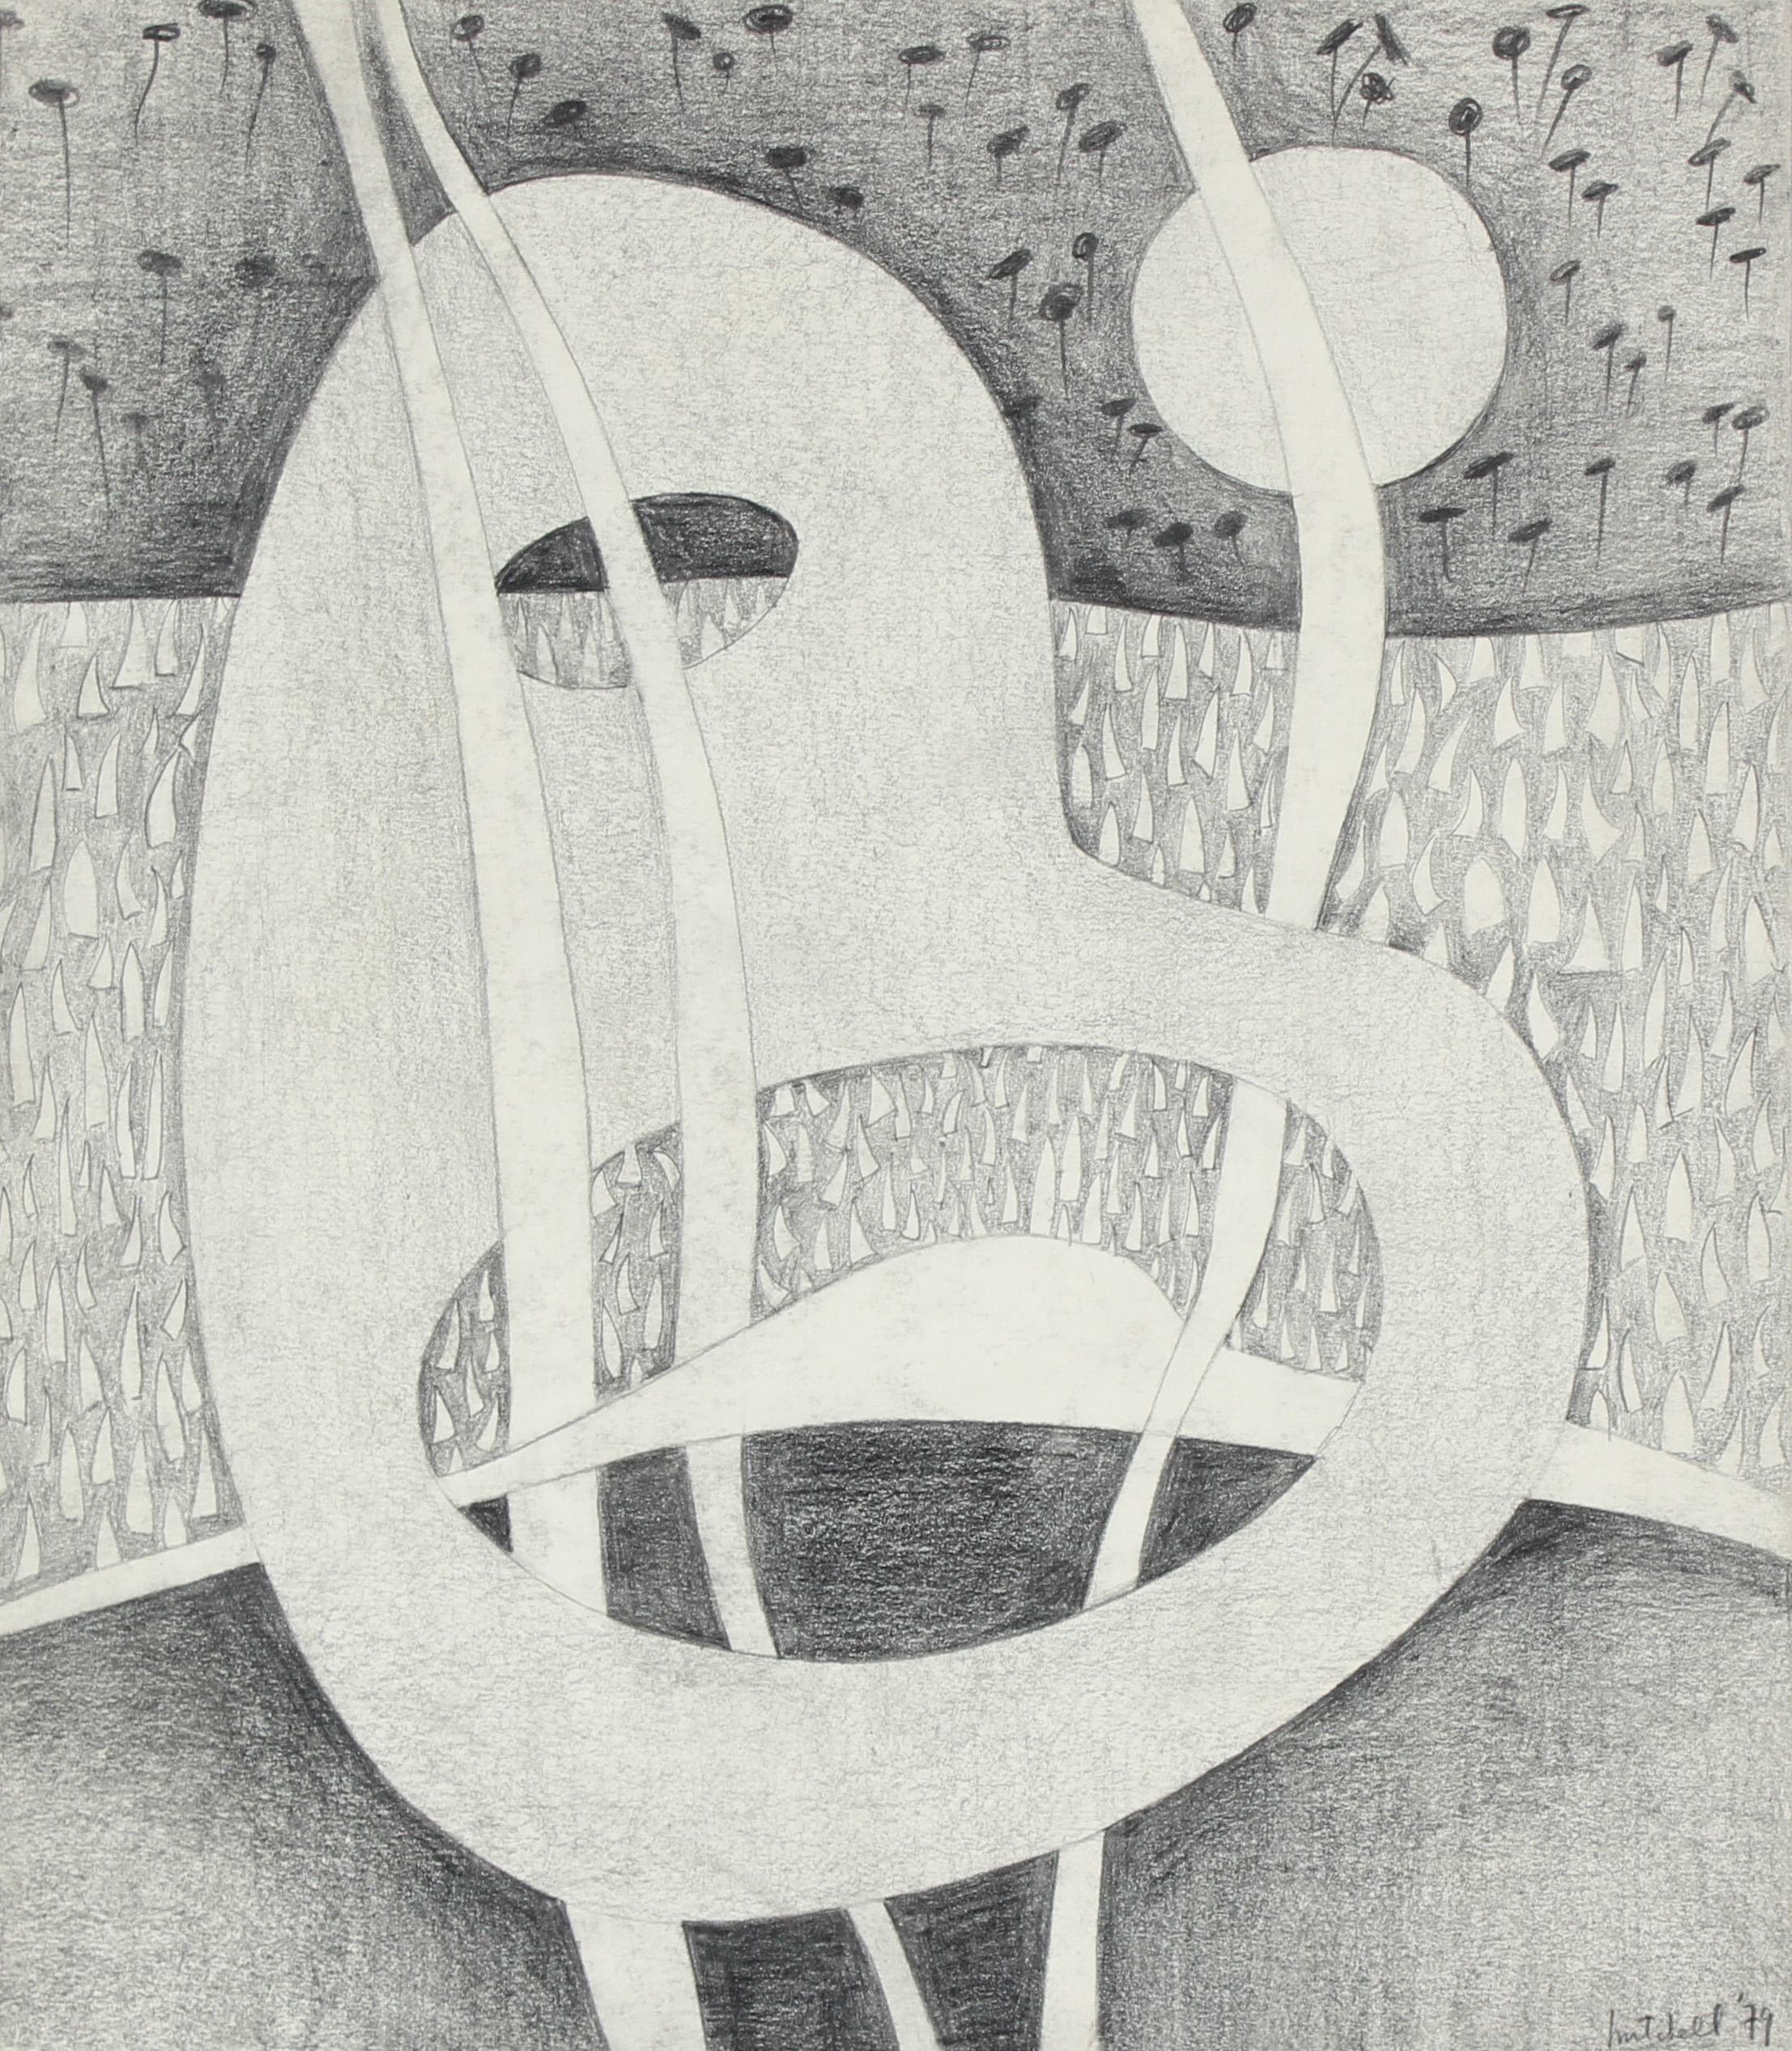 Jane Mitchell Abstract Drawing - Black and White Surrealist Abstract in Graphite, 1979